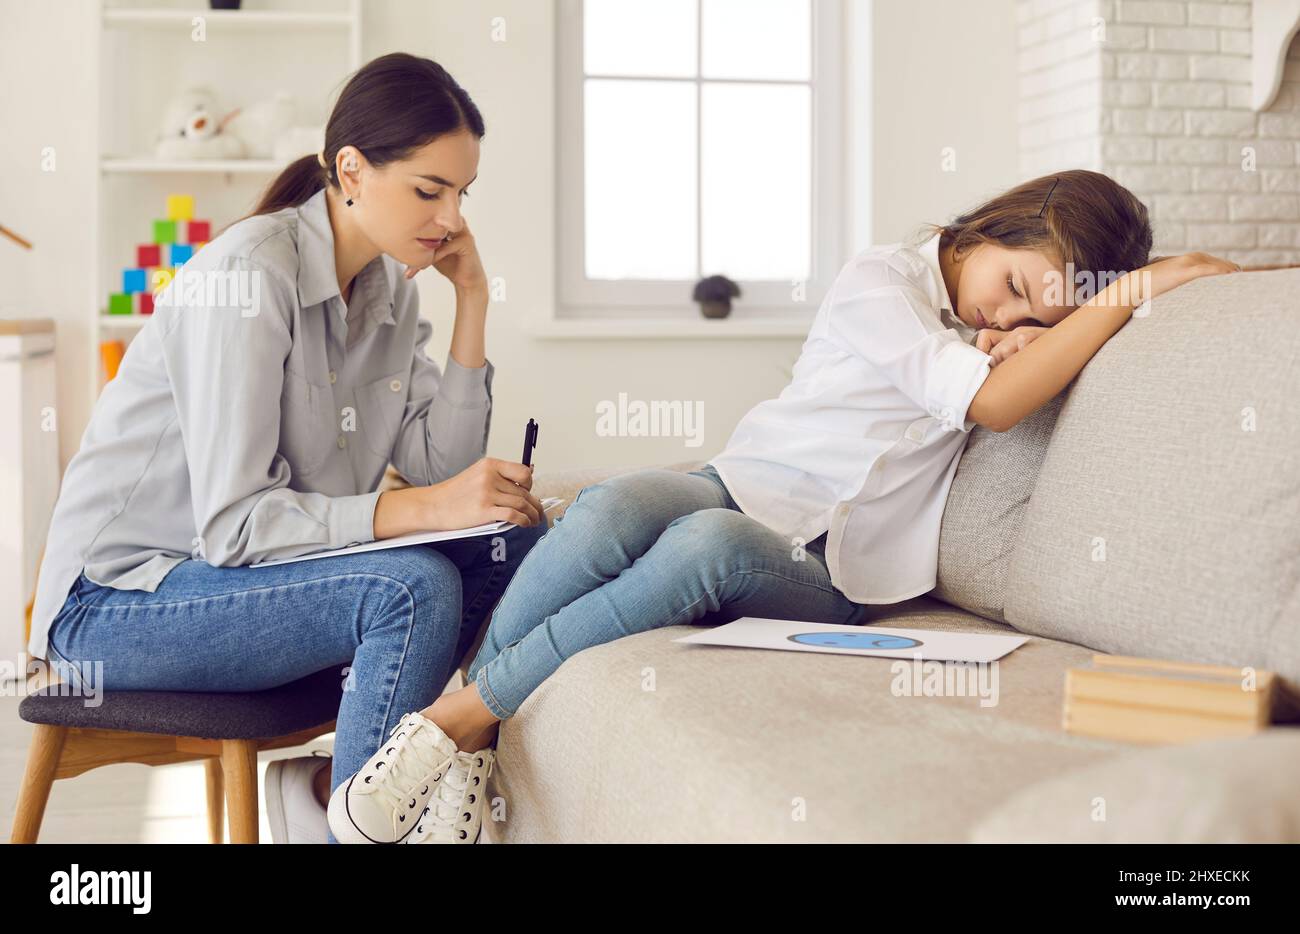 Children's psychologist or therapist helping sad girl cope with stress and problems Stock Photo